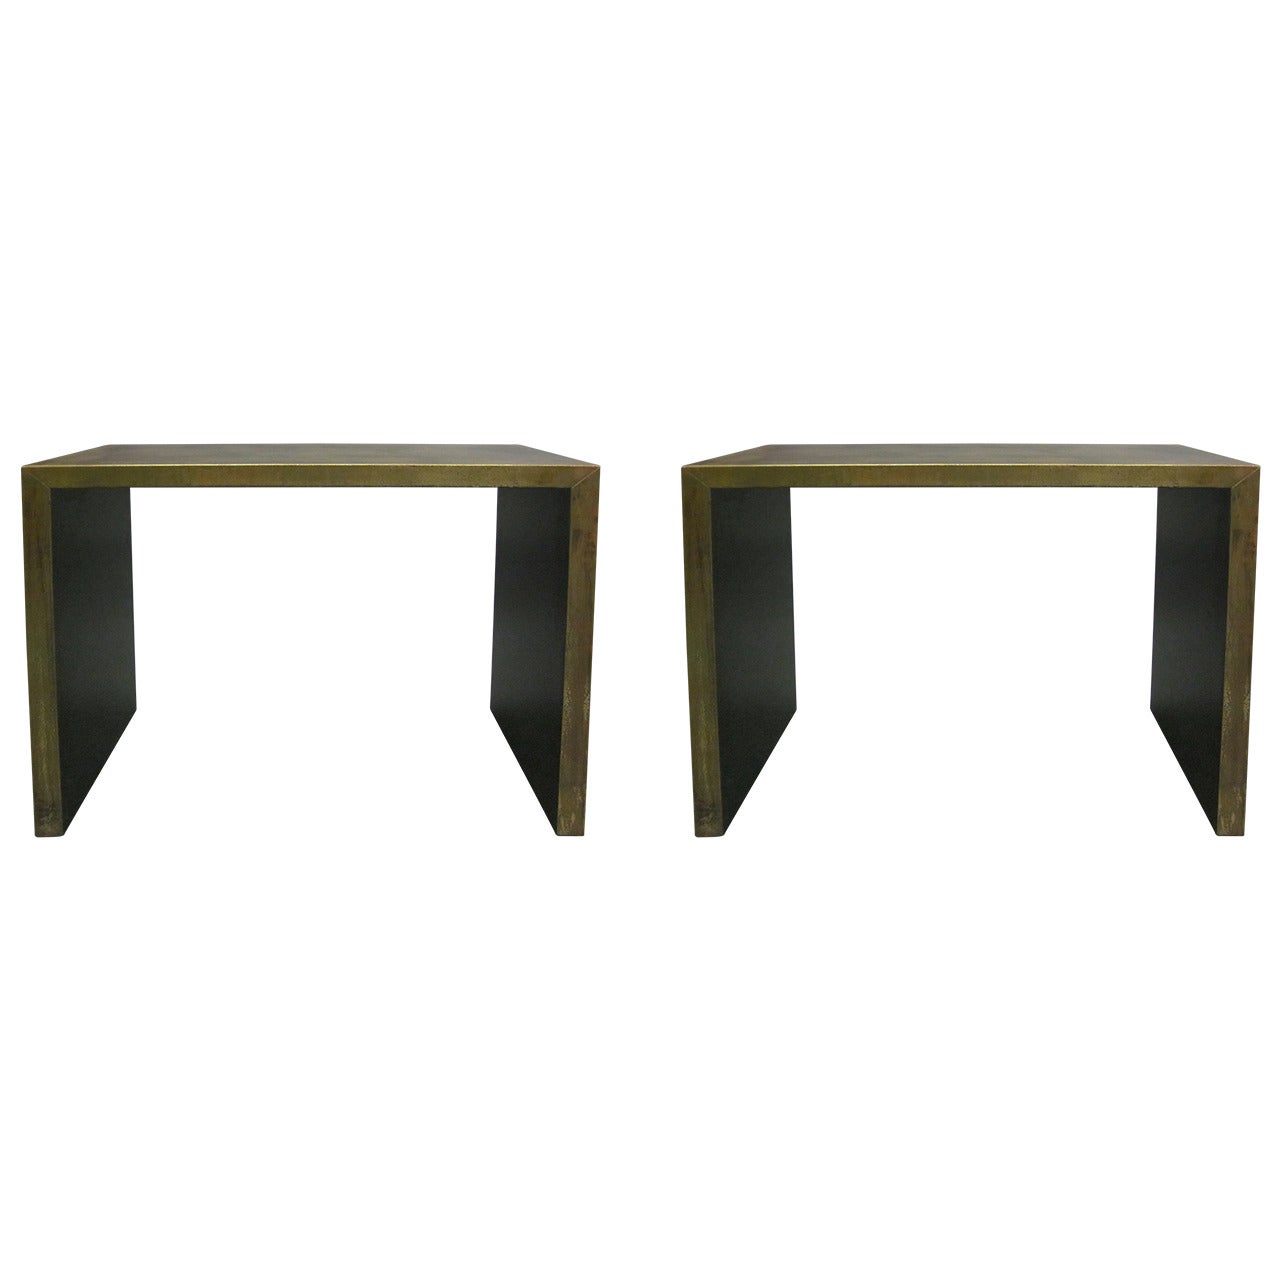 Italian Mid-Century Modern Patinated Brass Consoles, 1970 For Sale 5